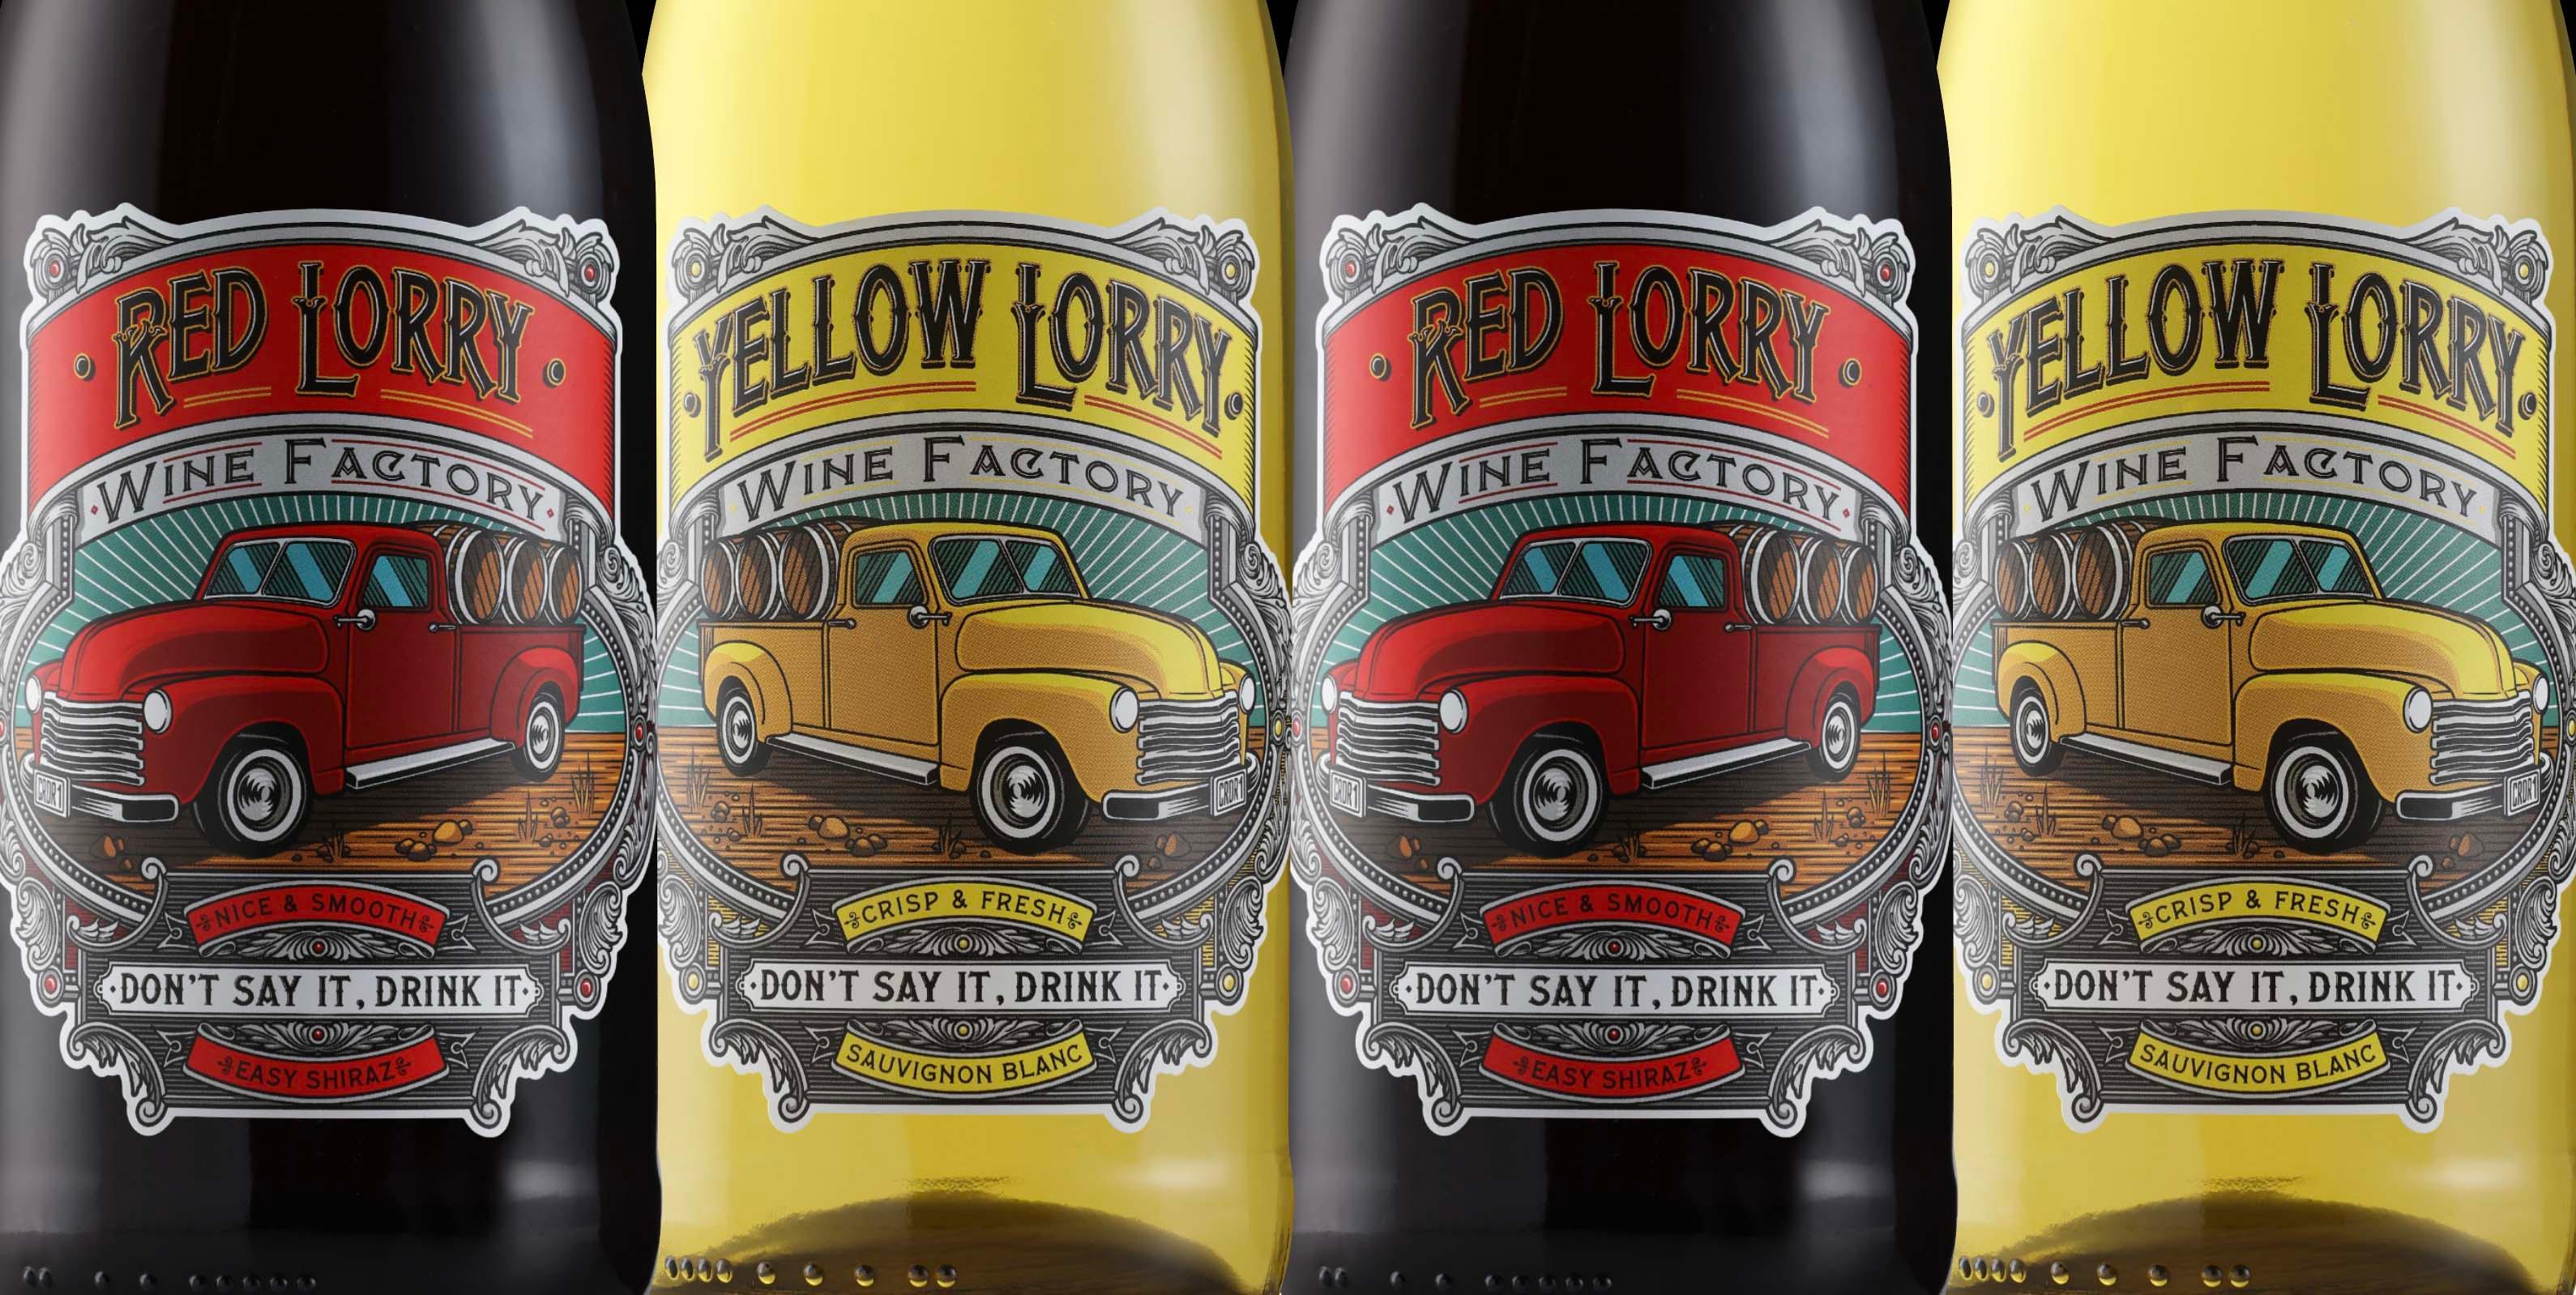 The Red & Yellow Lorry Wine Factory